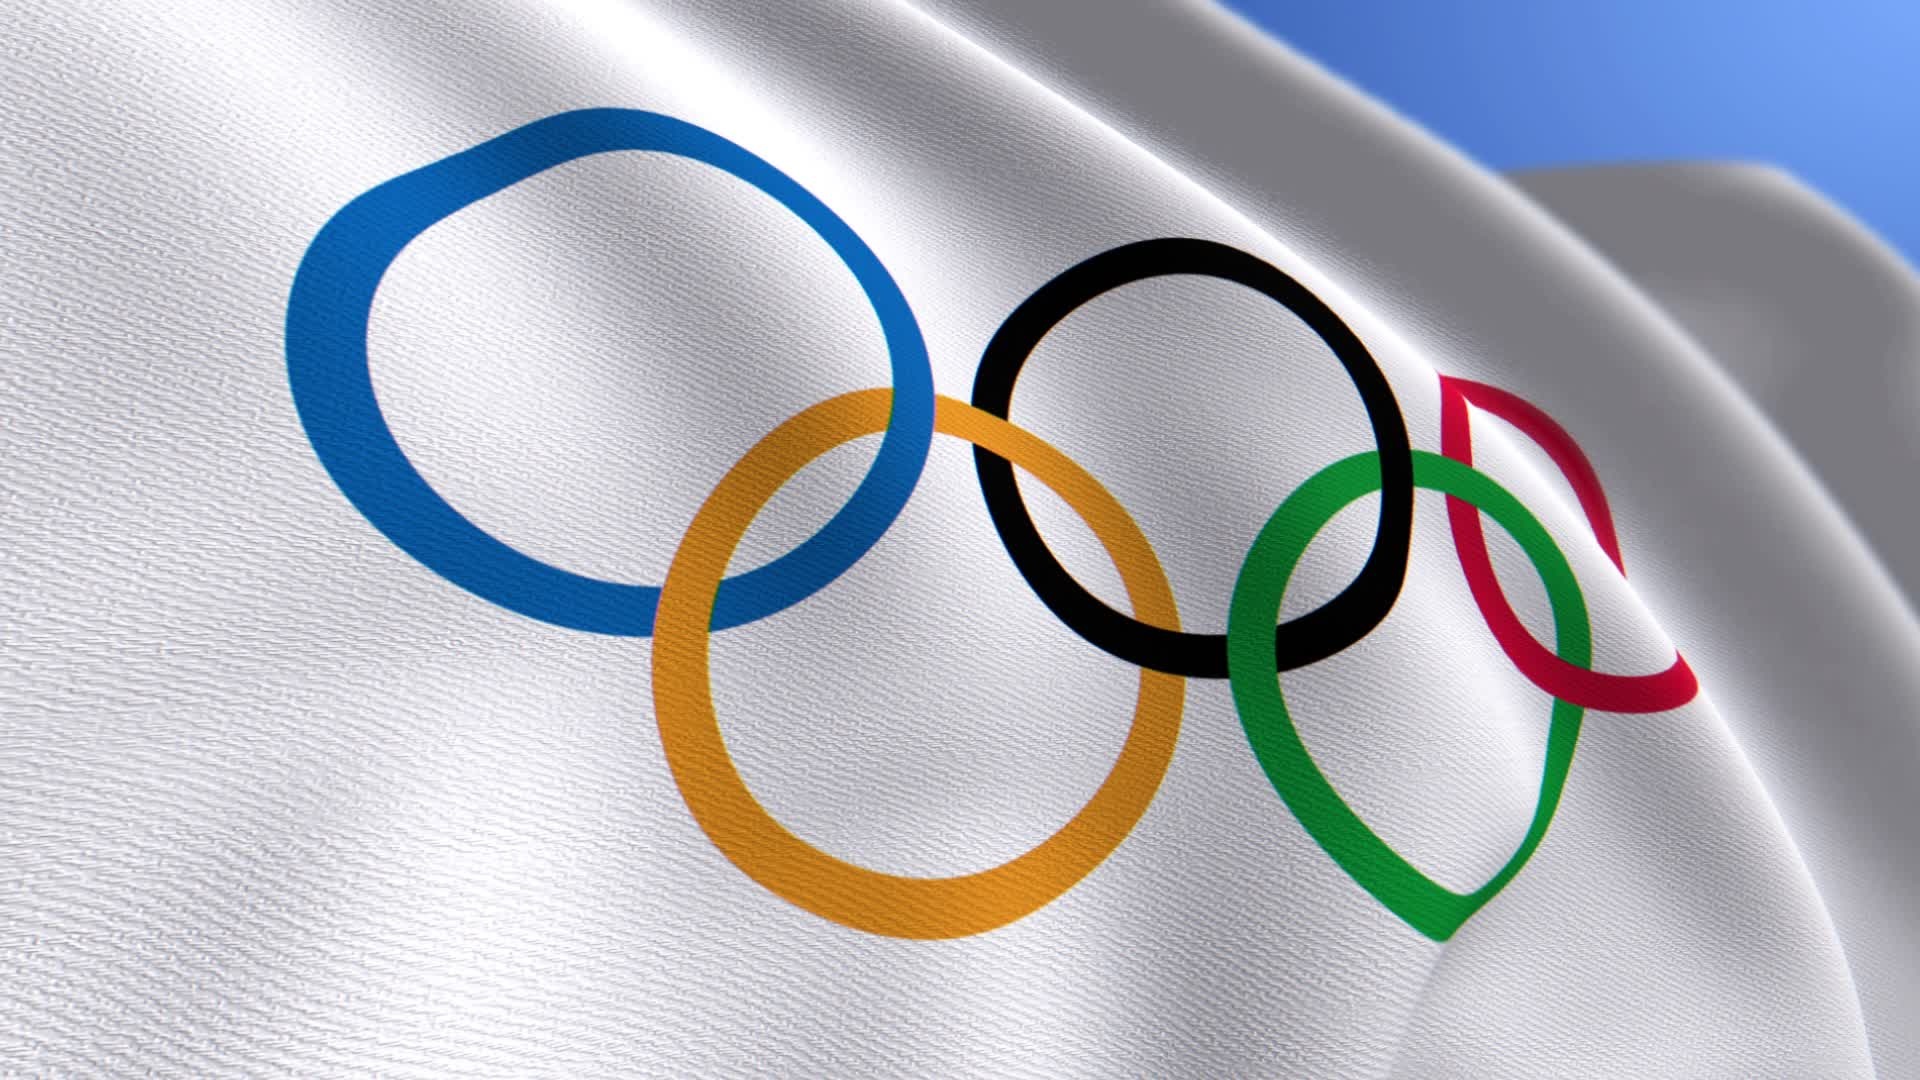 Olympics: Flag, A white field bearing five equal interlocking rings, An Olympic property. 1920x1080 Full HD Wallpaper.